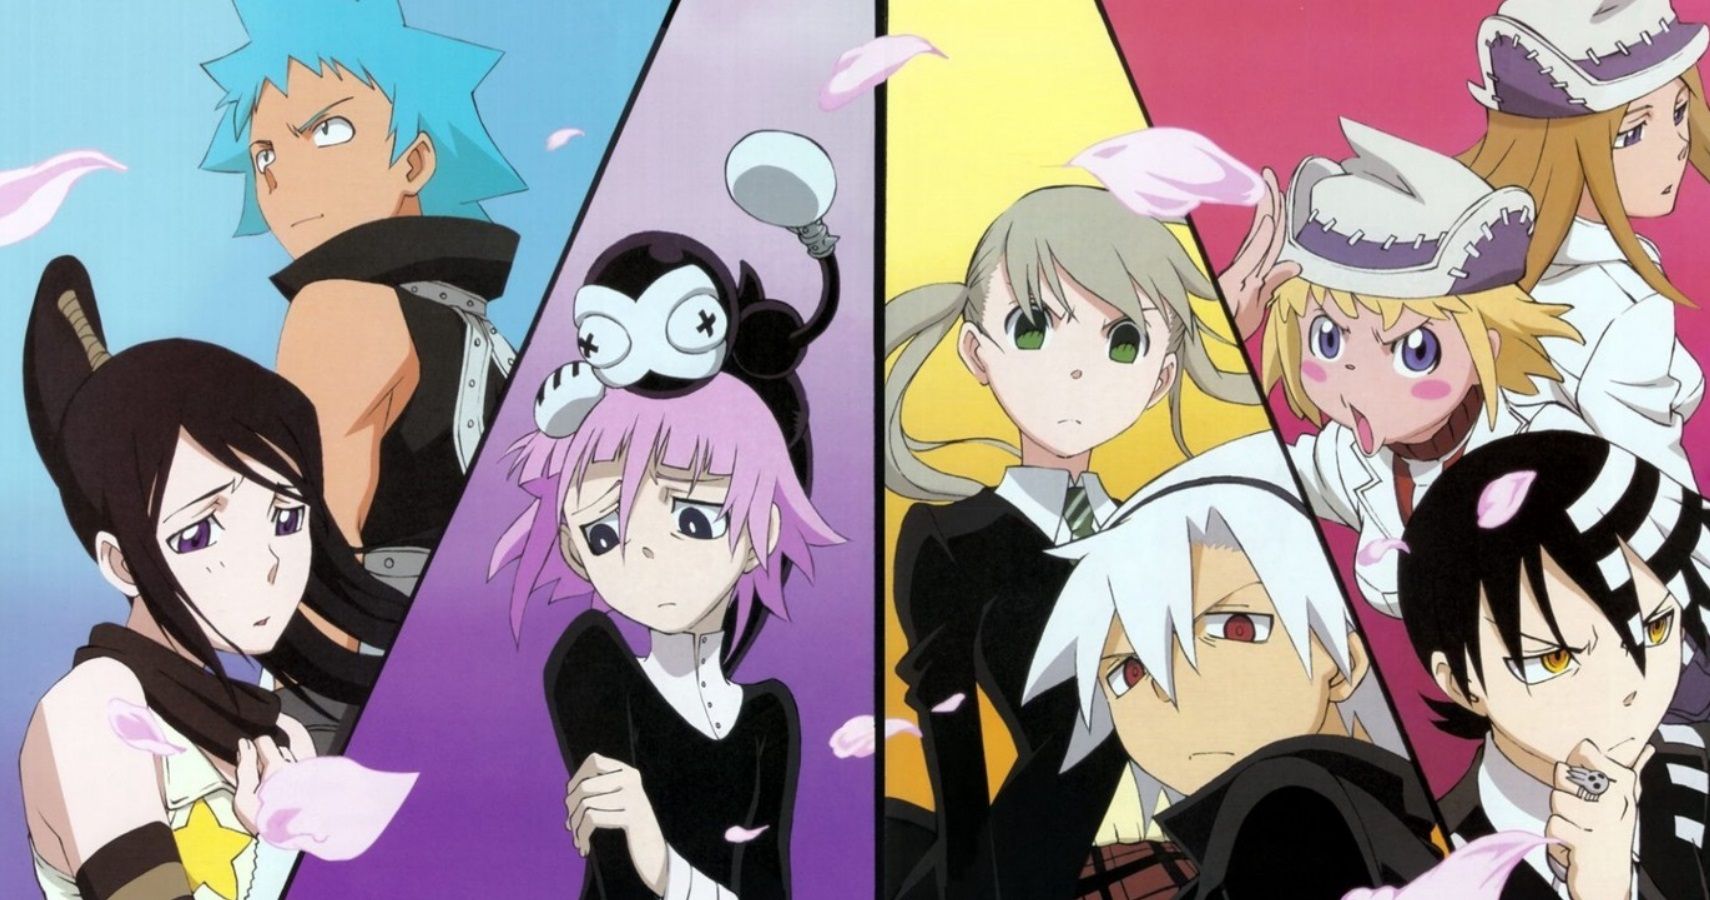 Soul eater anime to manga : r/souleater